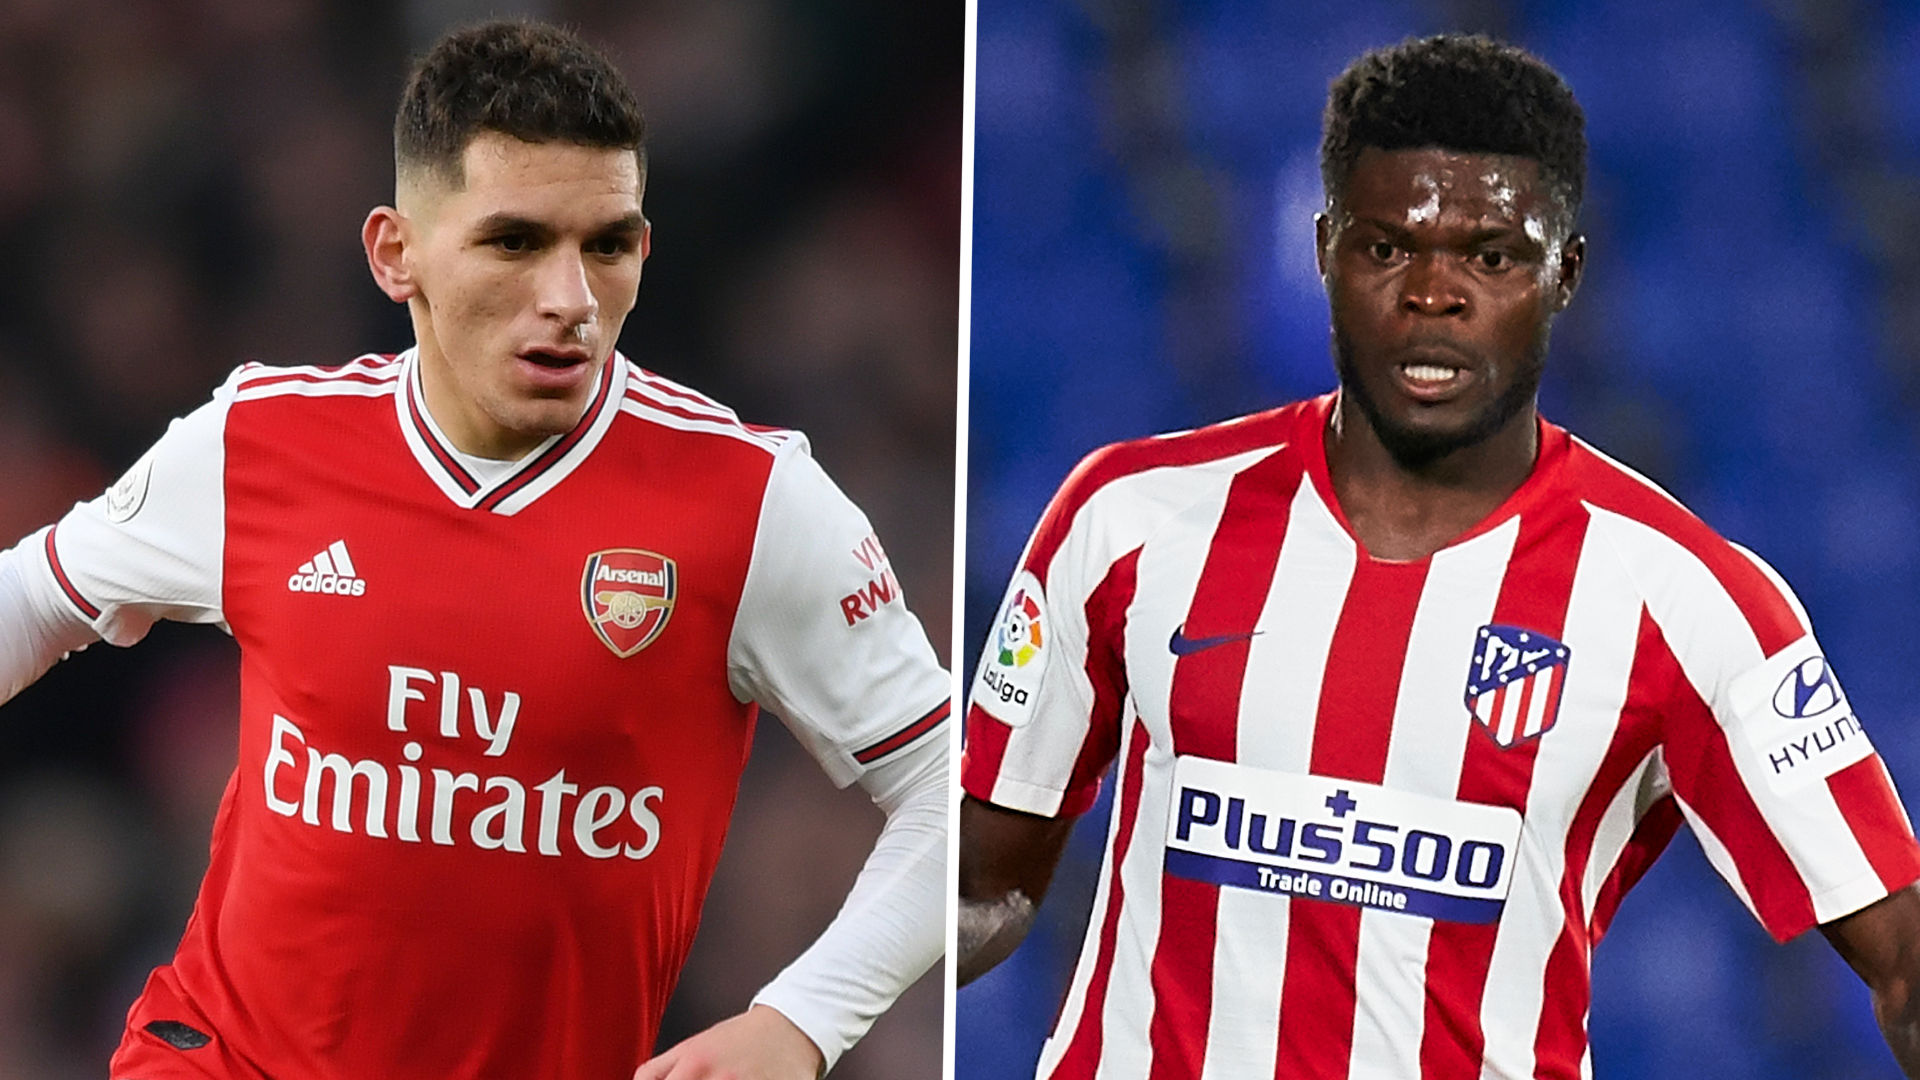 'Arsenal lacked a player of that profile' - Suarez tips Partey to shine and says Torreira is 'ideal' for Simeone